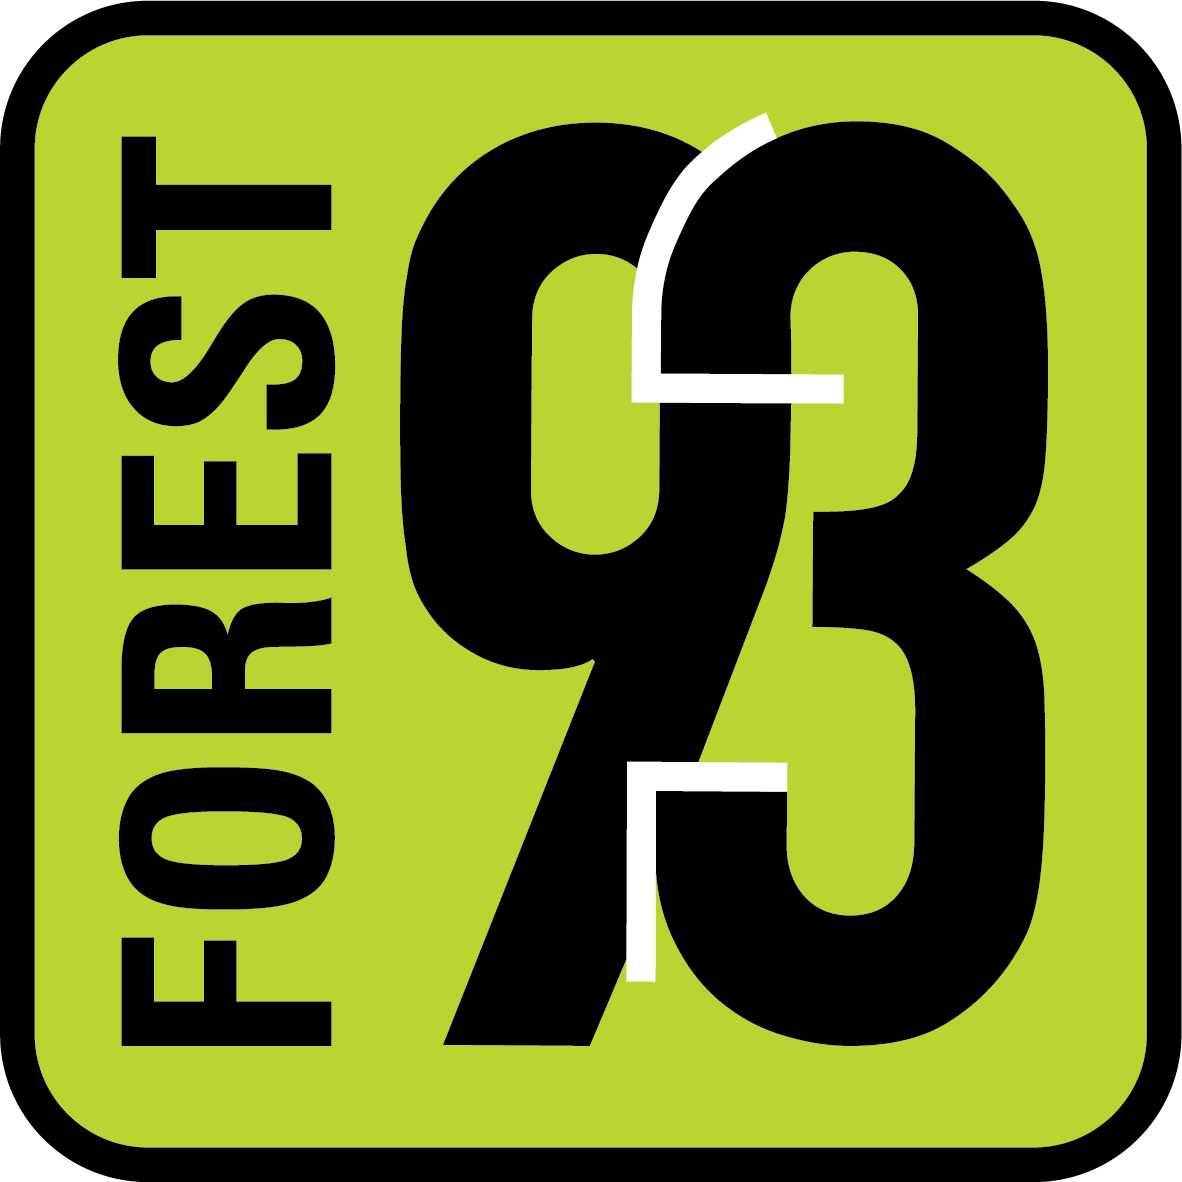 Forest 93 —————————————